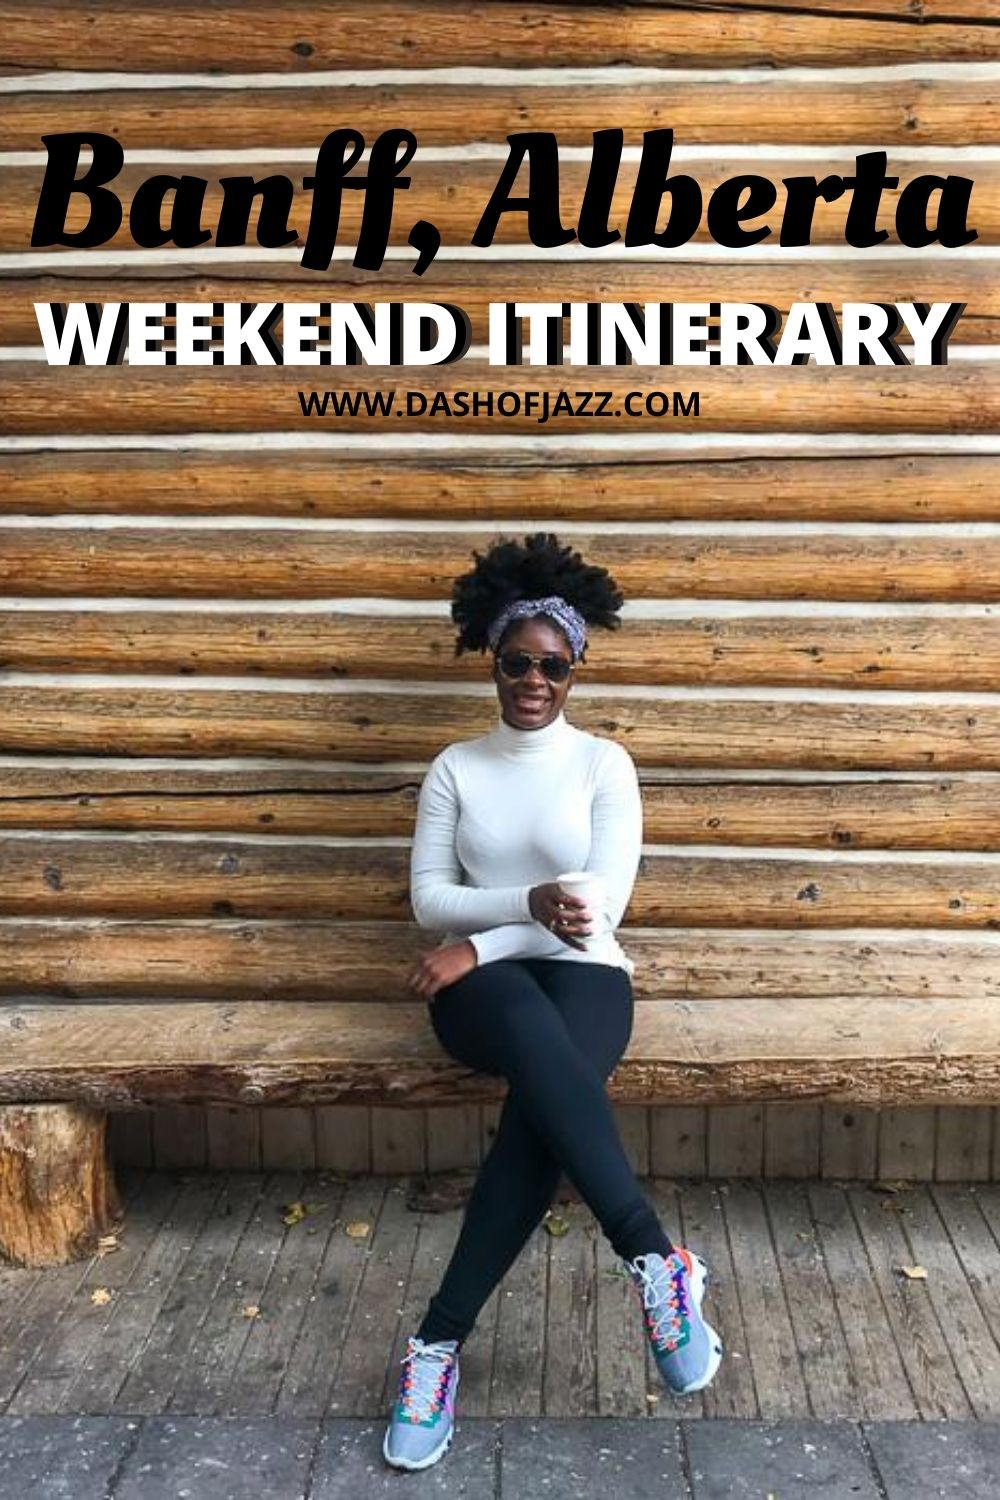 Jazzmine sitting in front of log cabin wall holding coffee with text overlay "Banff, Alberta weekend itinerary"